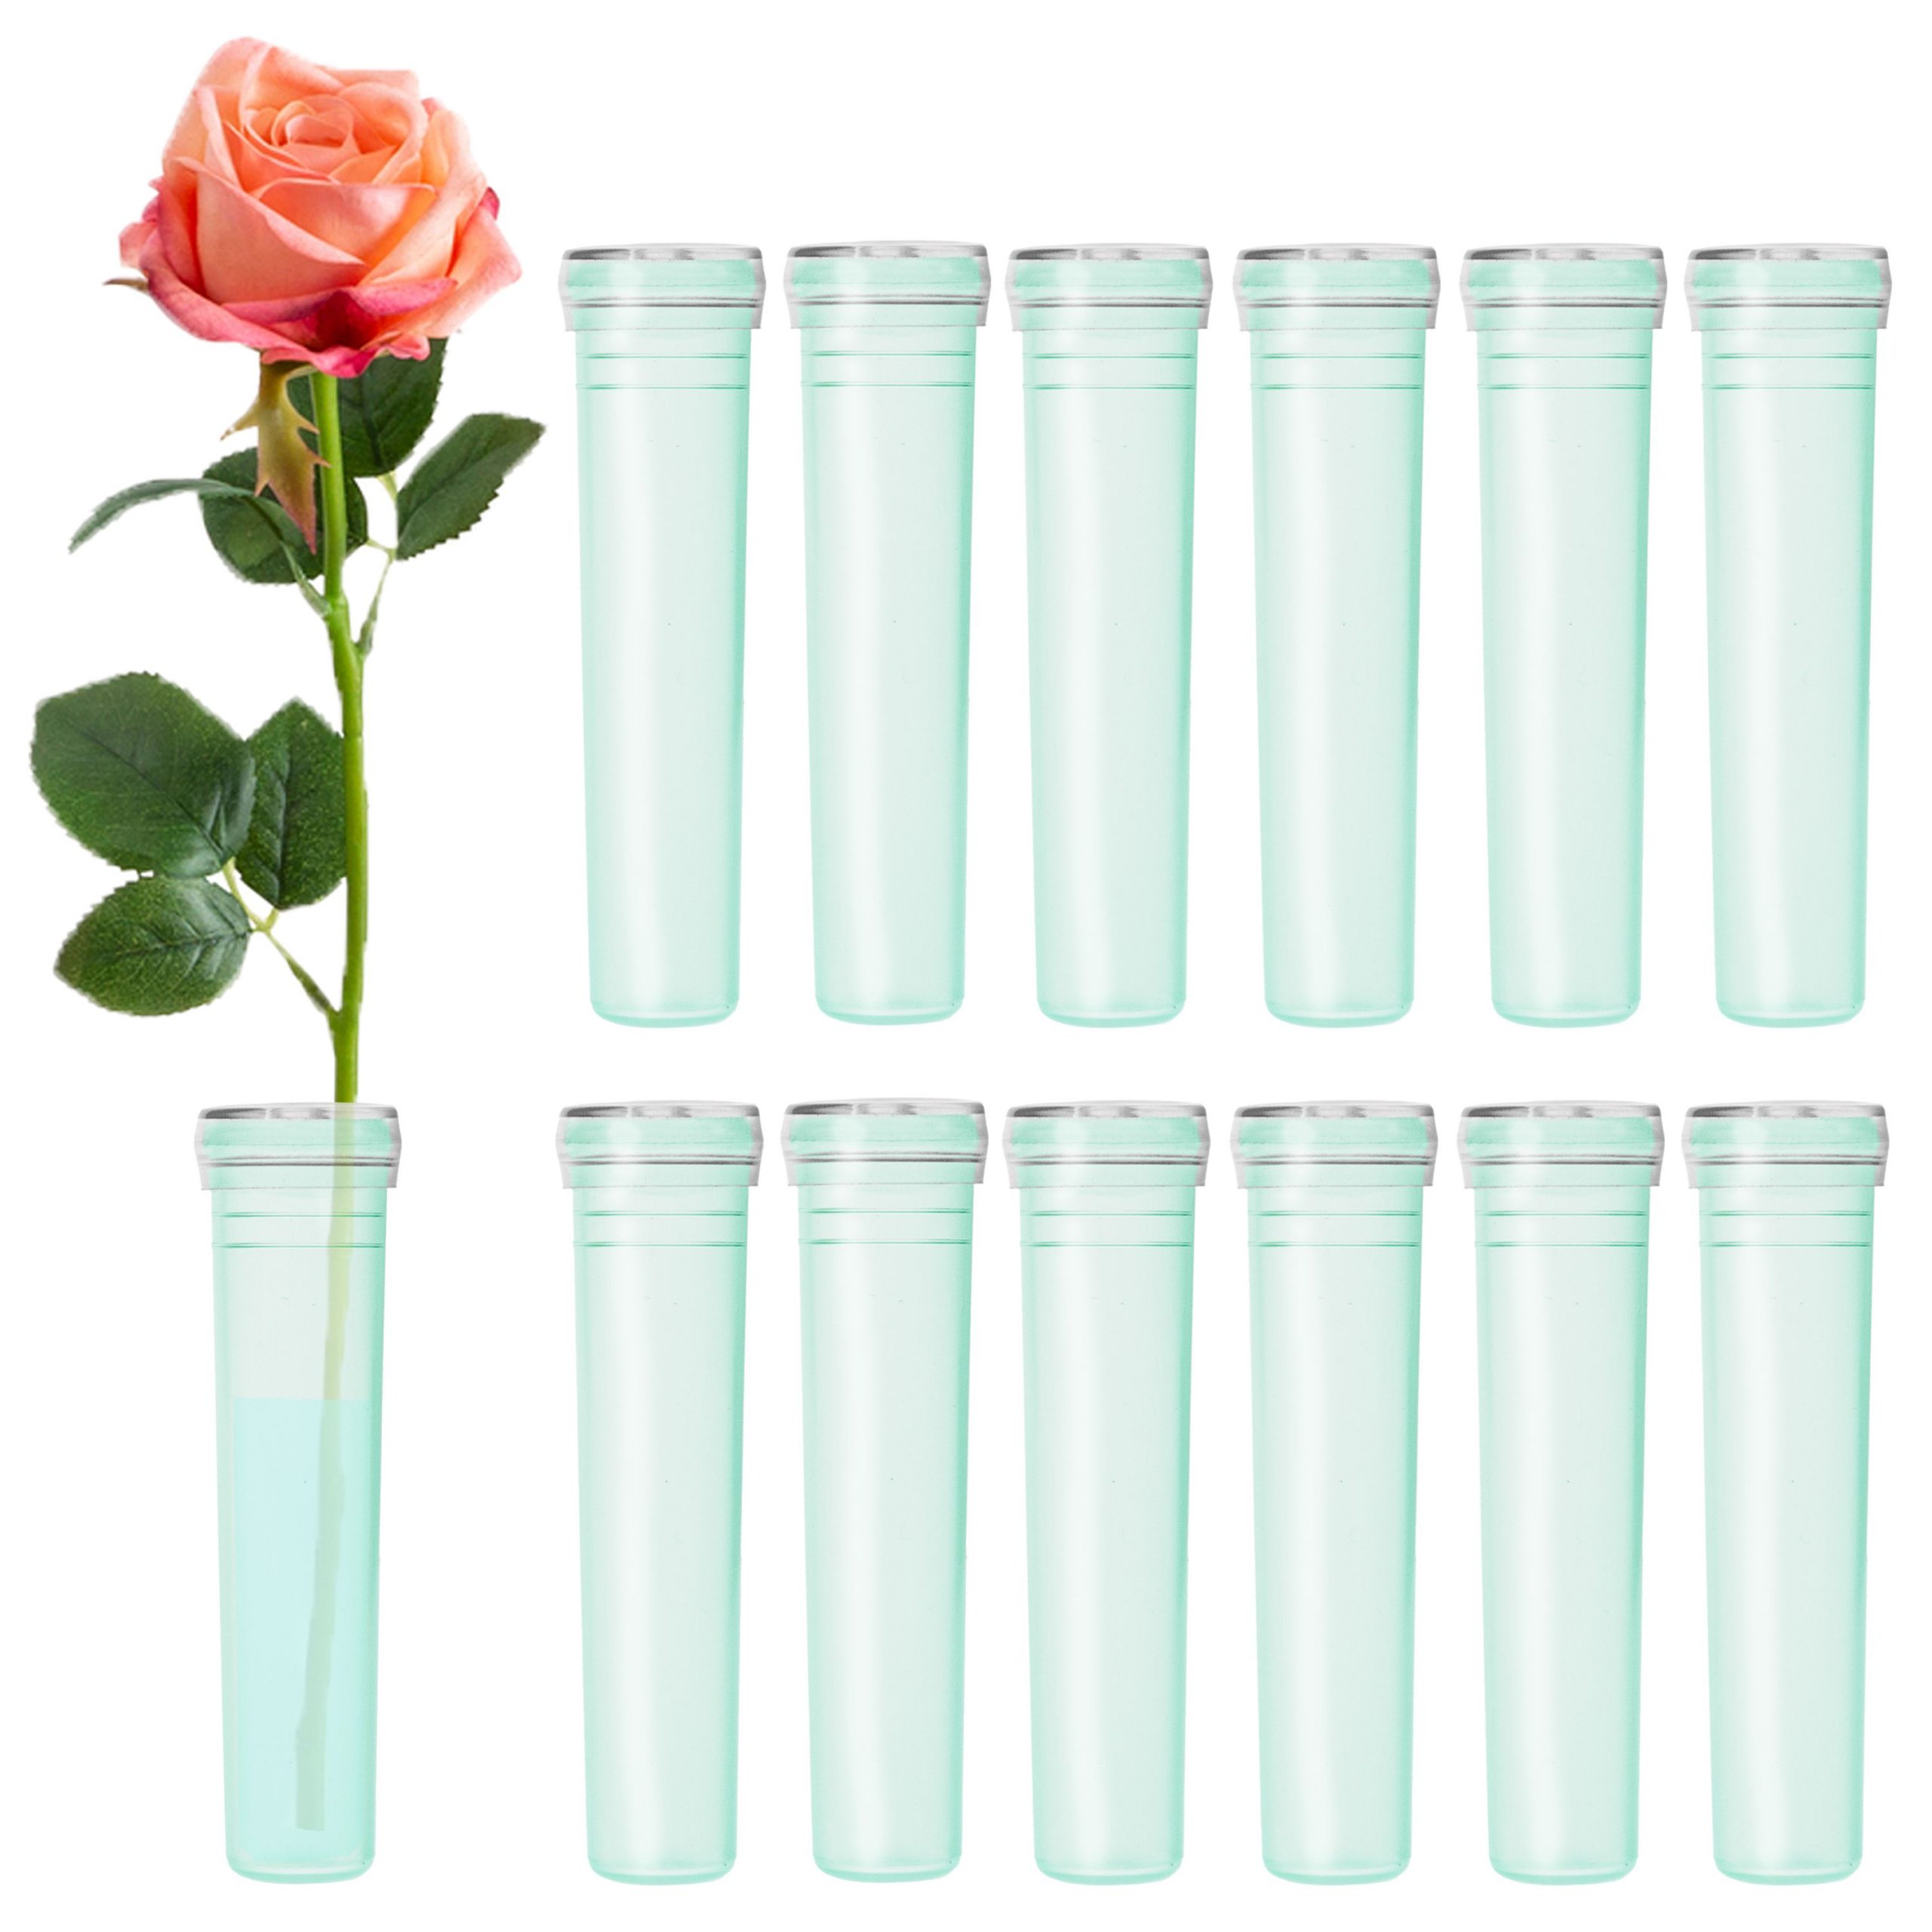 Supplies for Flower Arrangements Floral Water Tubes 12 in, Green, 30 Pack 